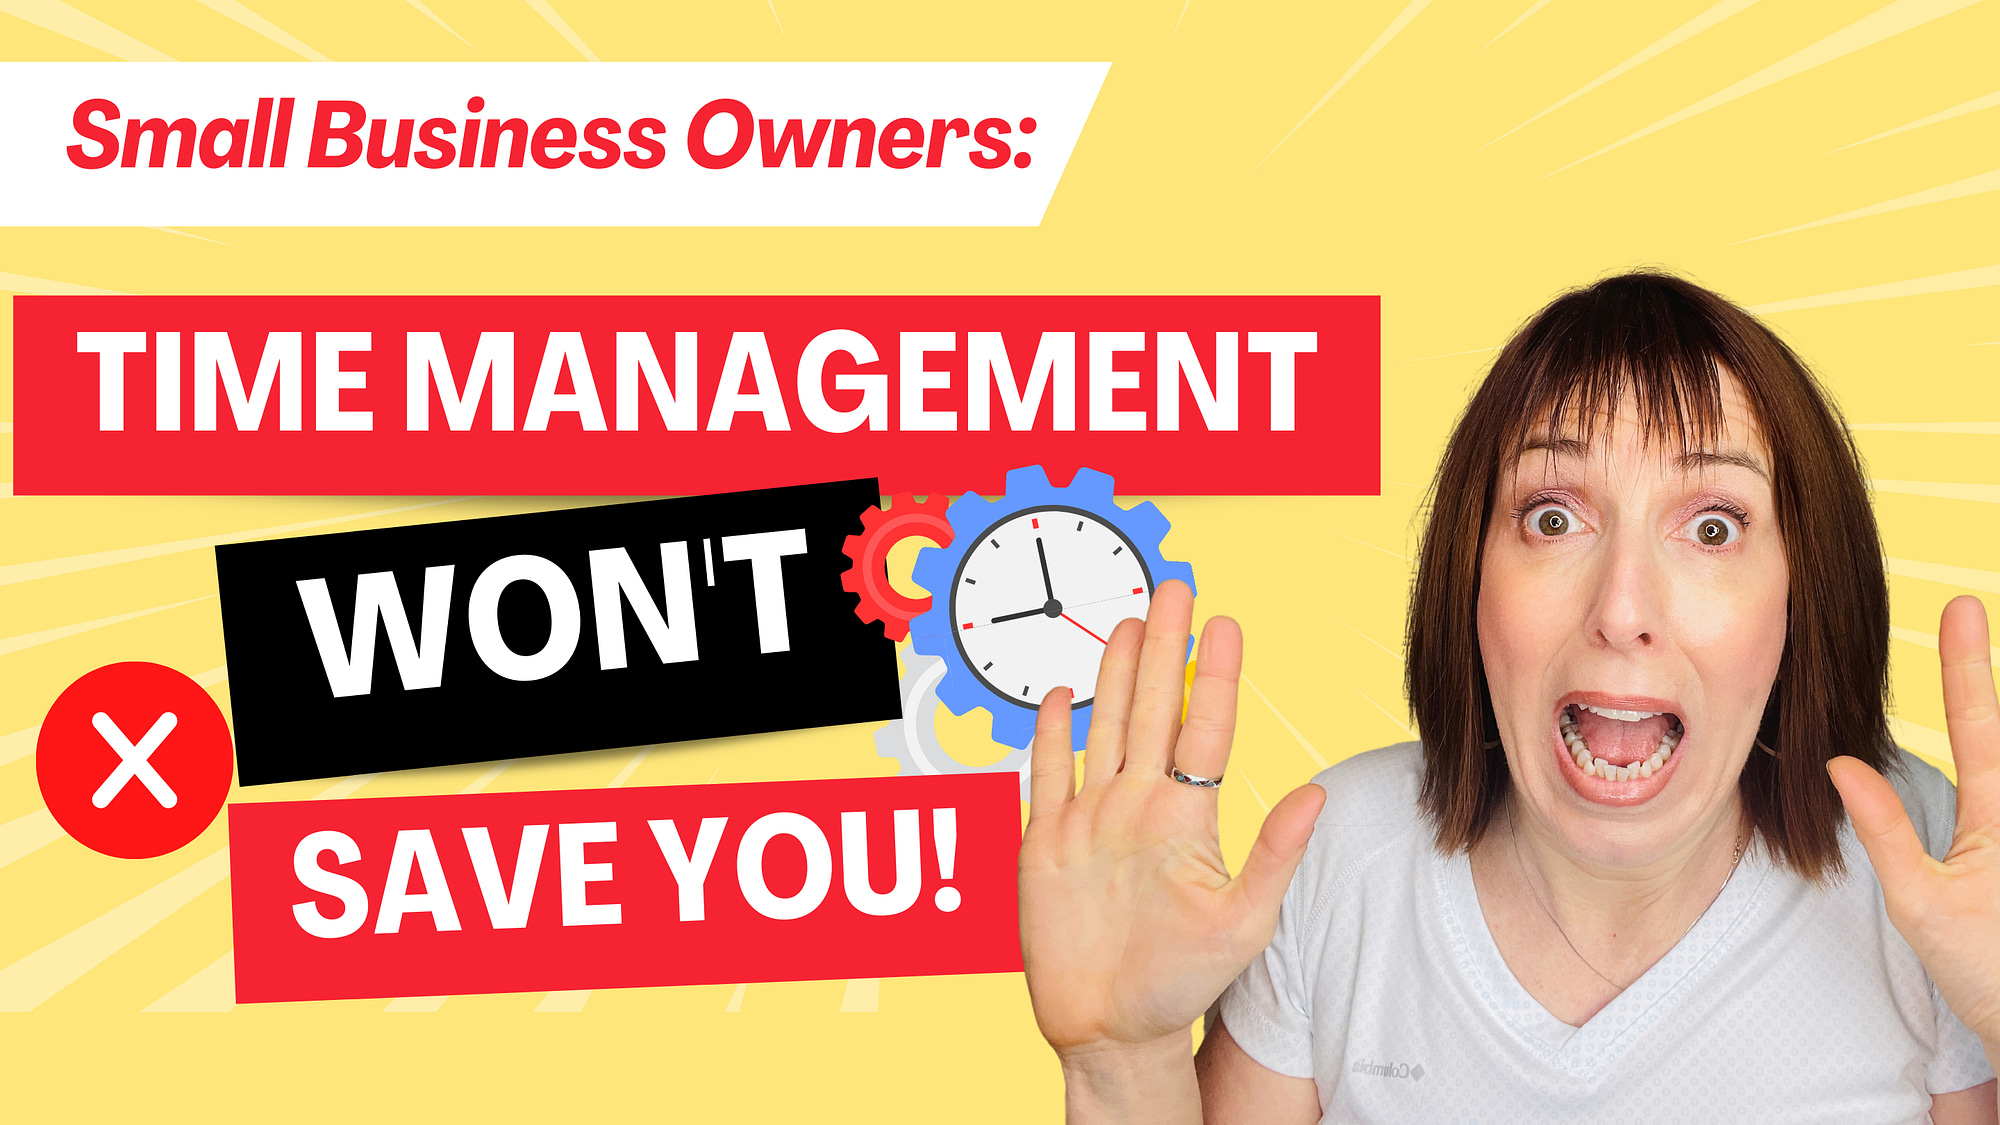 Small Business Owners, Time Management Won't Save you